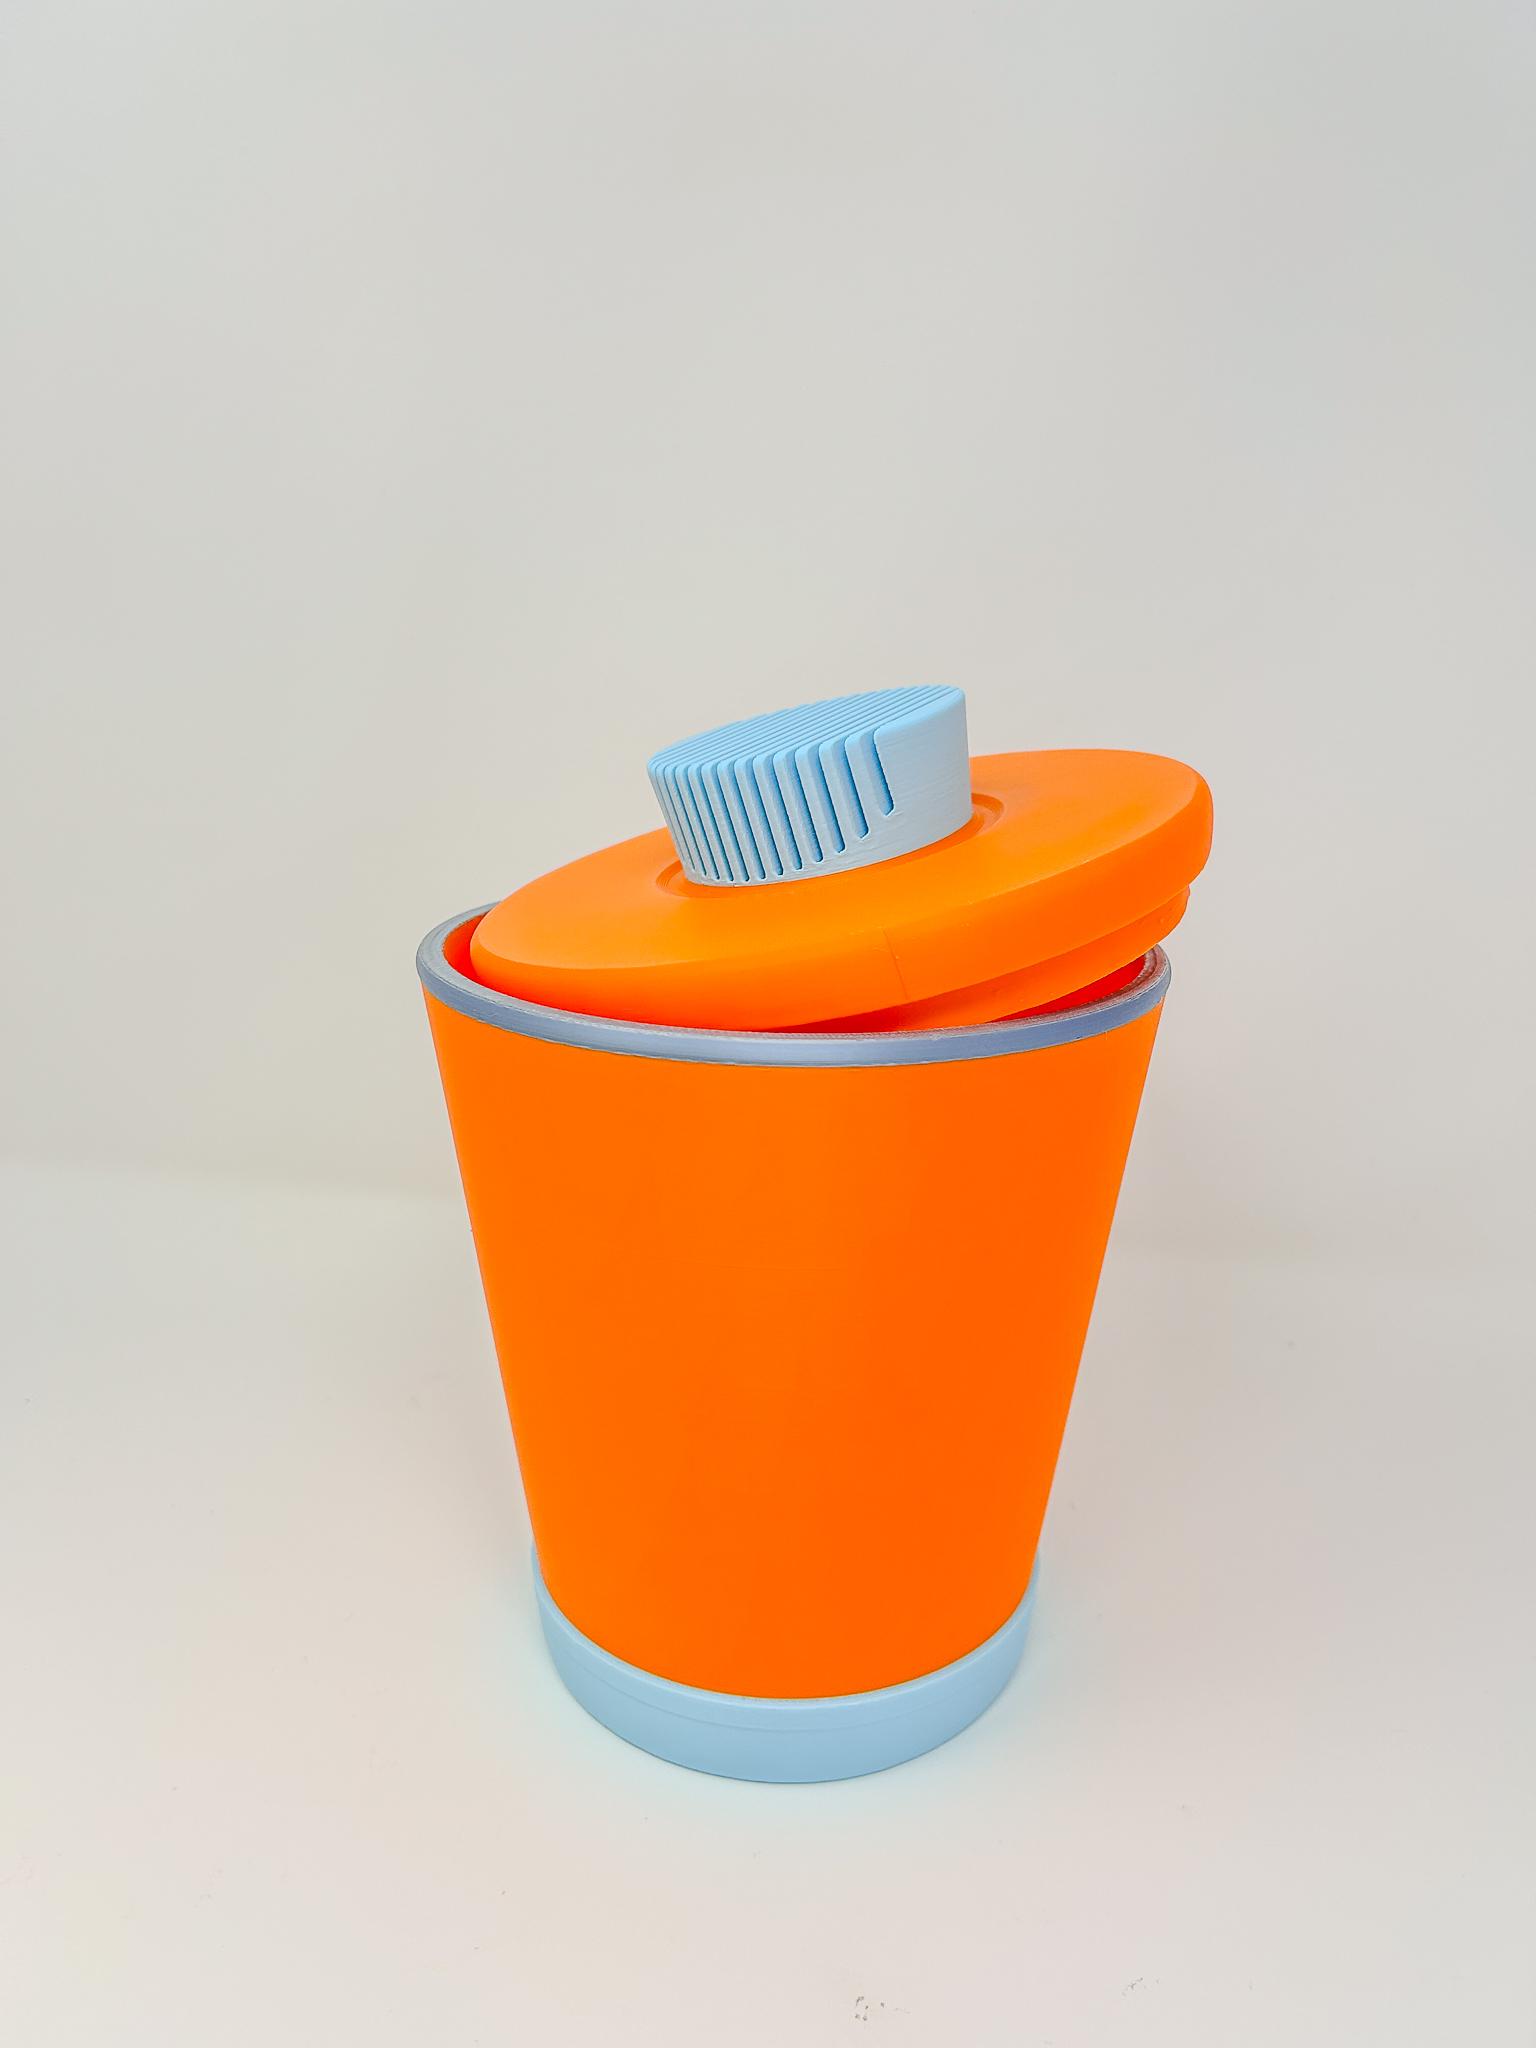 Retro Bucket Organizer - Vintage 1960s-Inspired Knick Knack Organizer with Partitioned Compartments 3d model